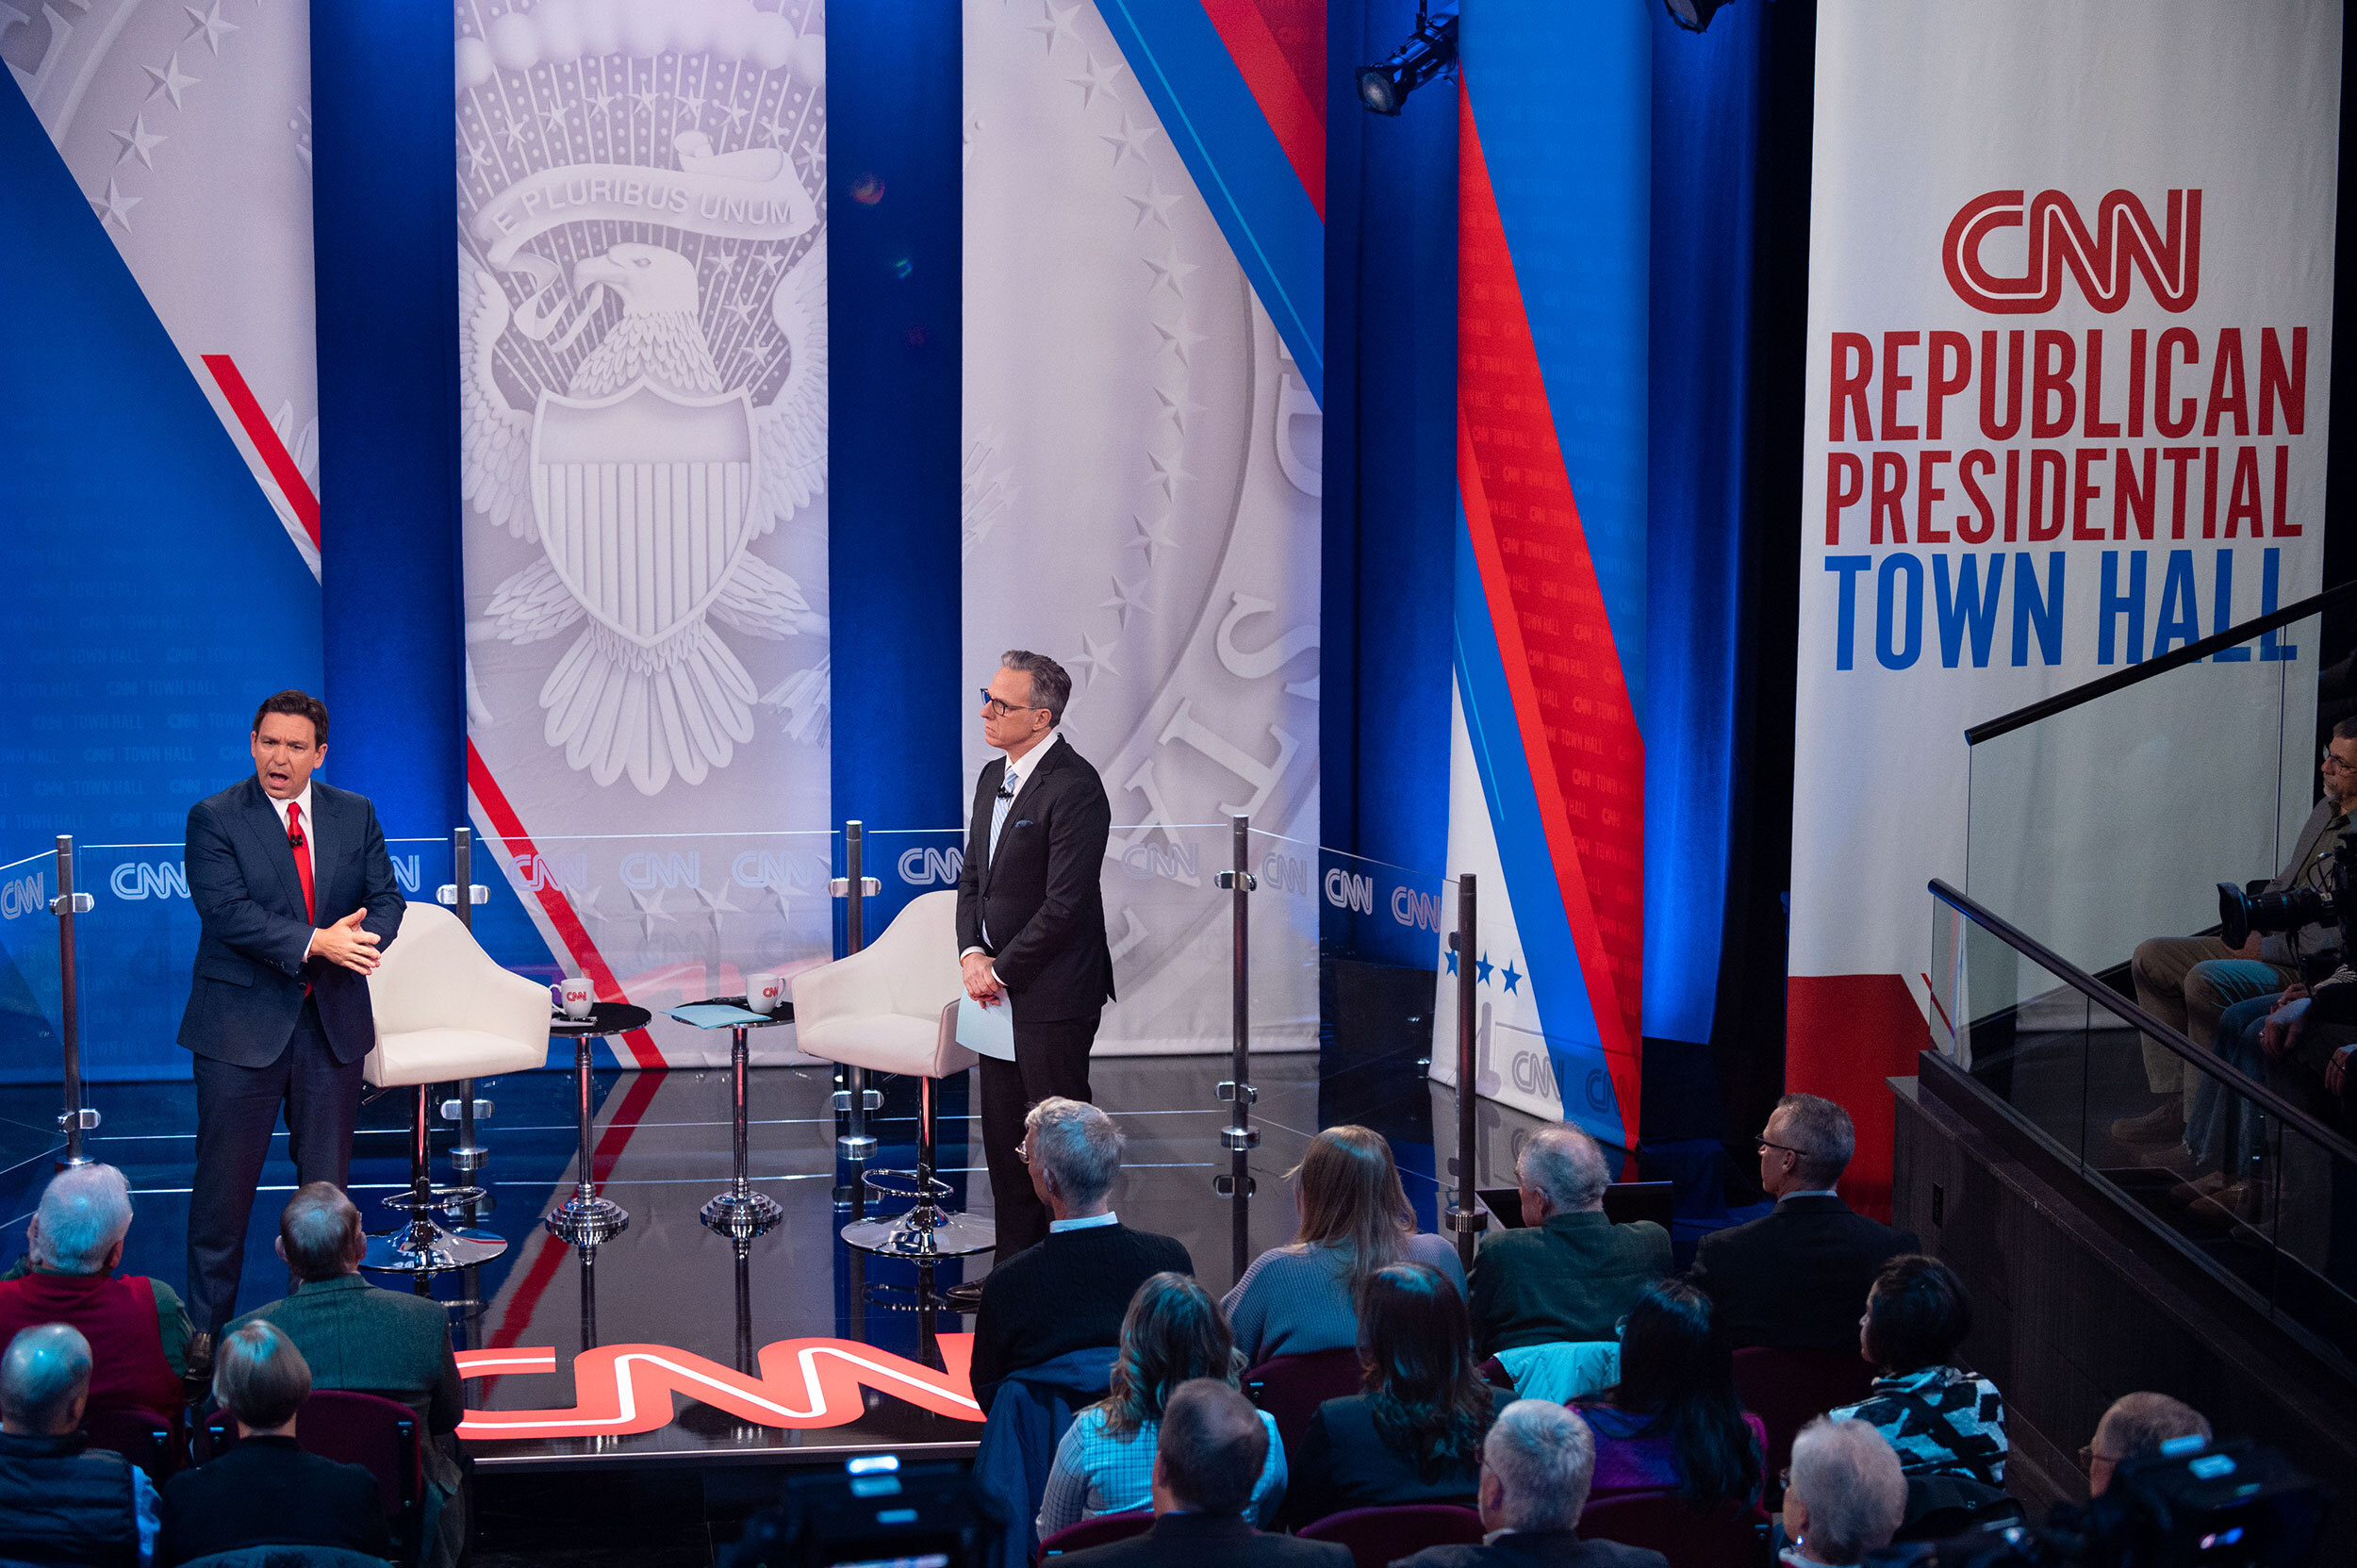 Florida Gov. Ron DeSantis participates in a CNN Republican Town Hall moderated by CNN’s Jake Tapper at Grand View University in Des Moines, Iowa, on Tuesday, December 12.